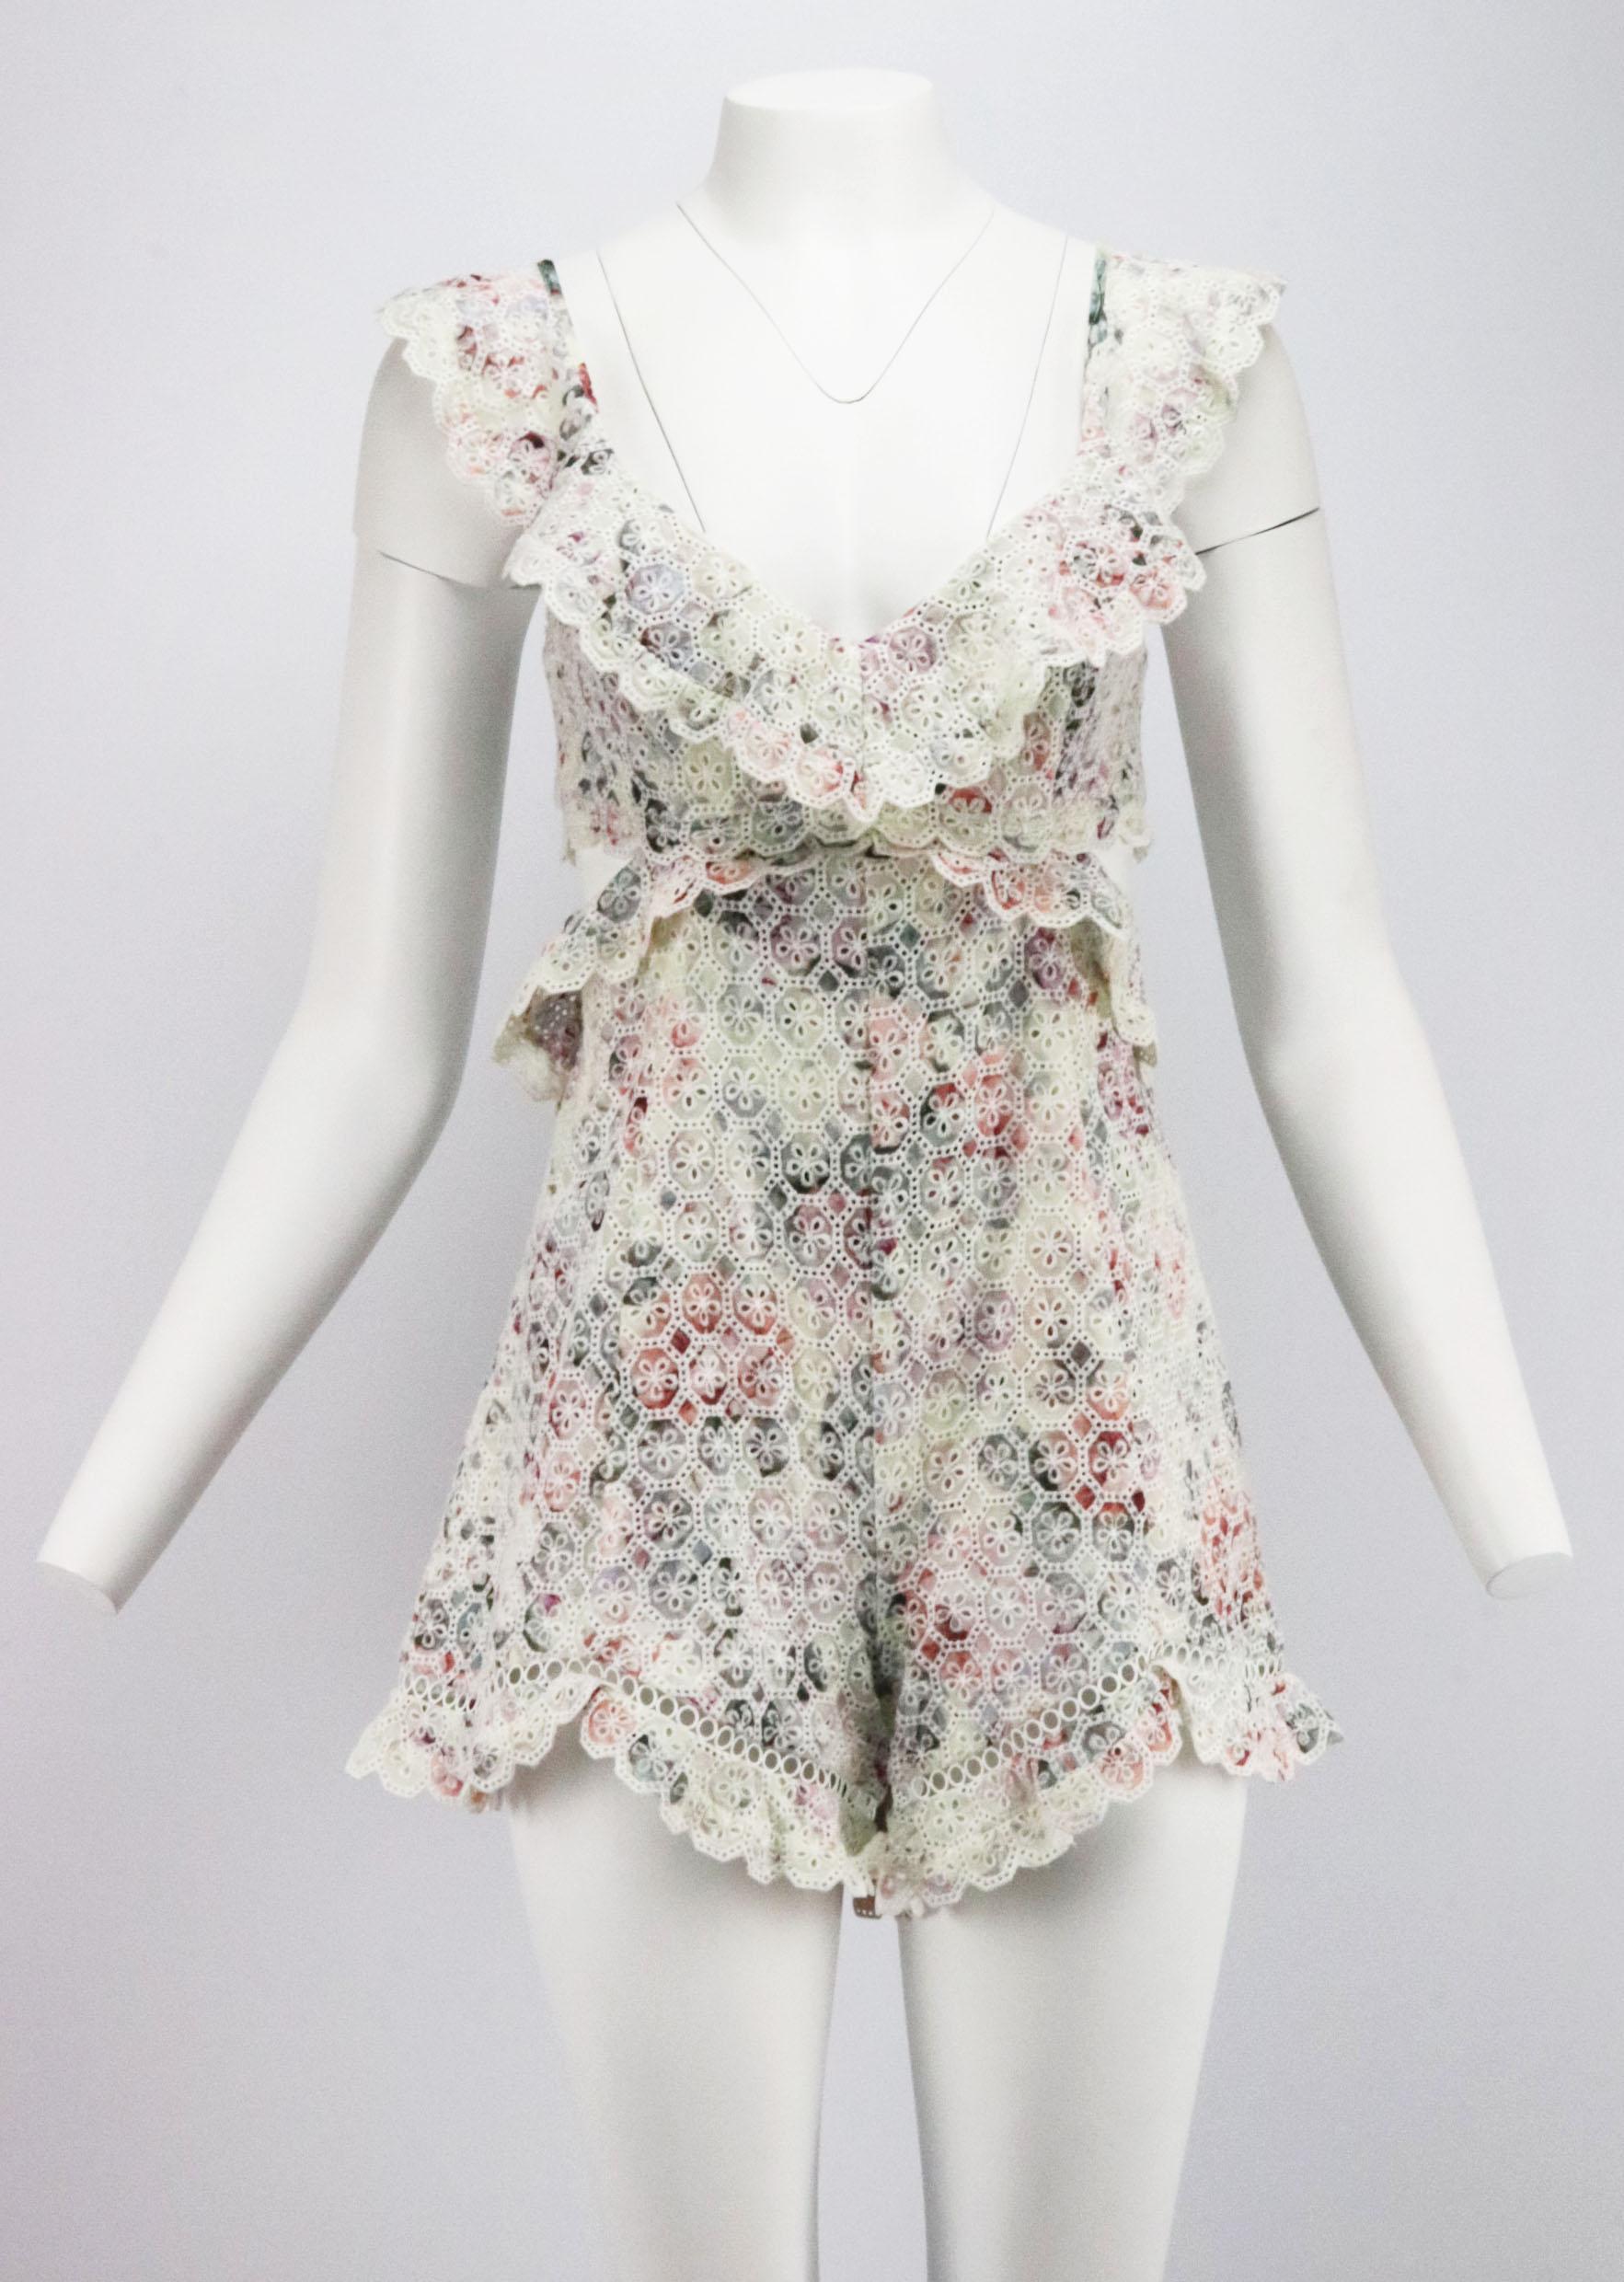 This Jasper playsuit by Zimmermann is made from intricate broderie anglaise cotton and fully lined for coverage, it has flouncy ruffled trims and a cutout at the back topped with a beautiful floral print throughout.
Multi broderie anglaise